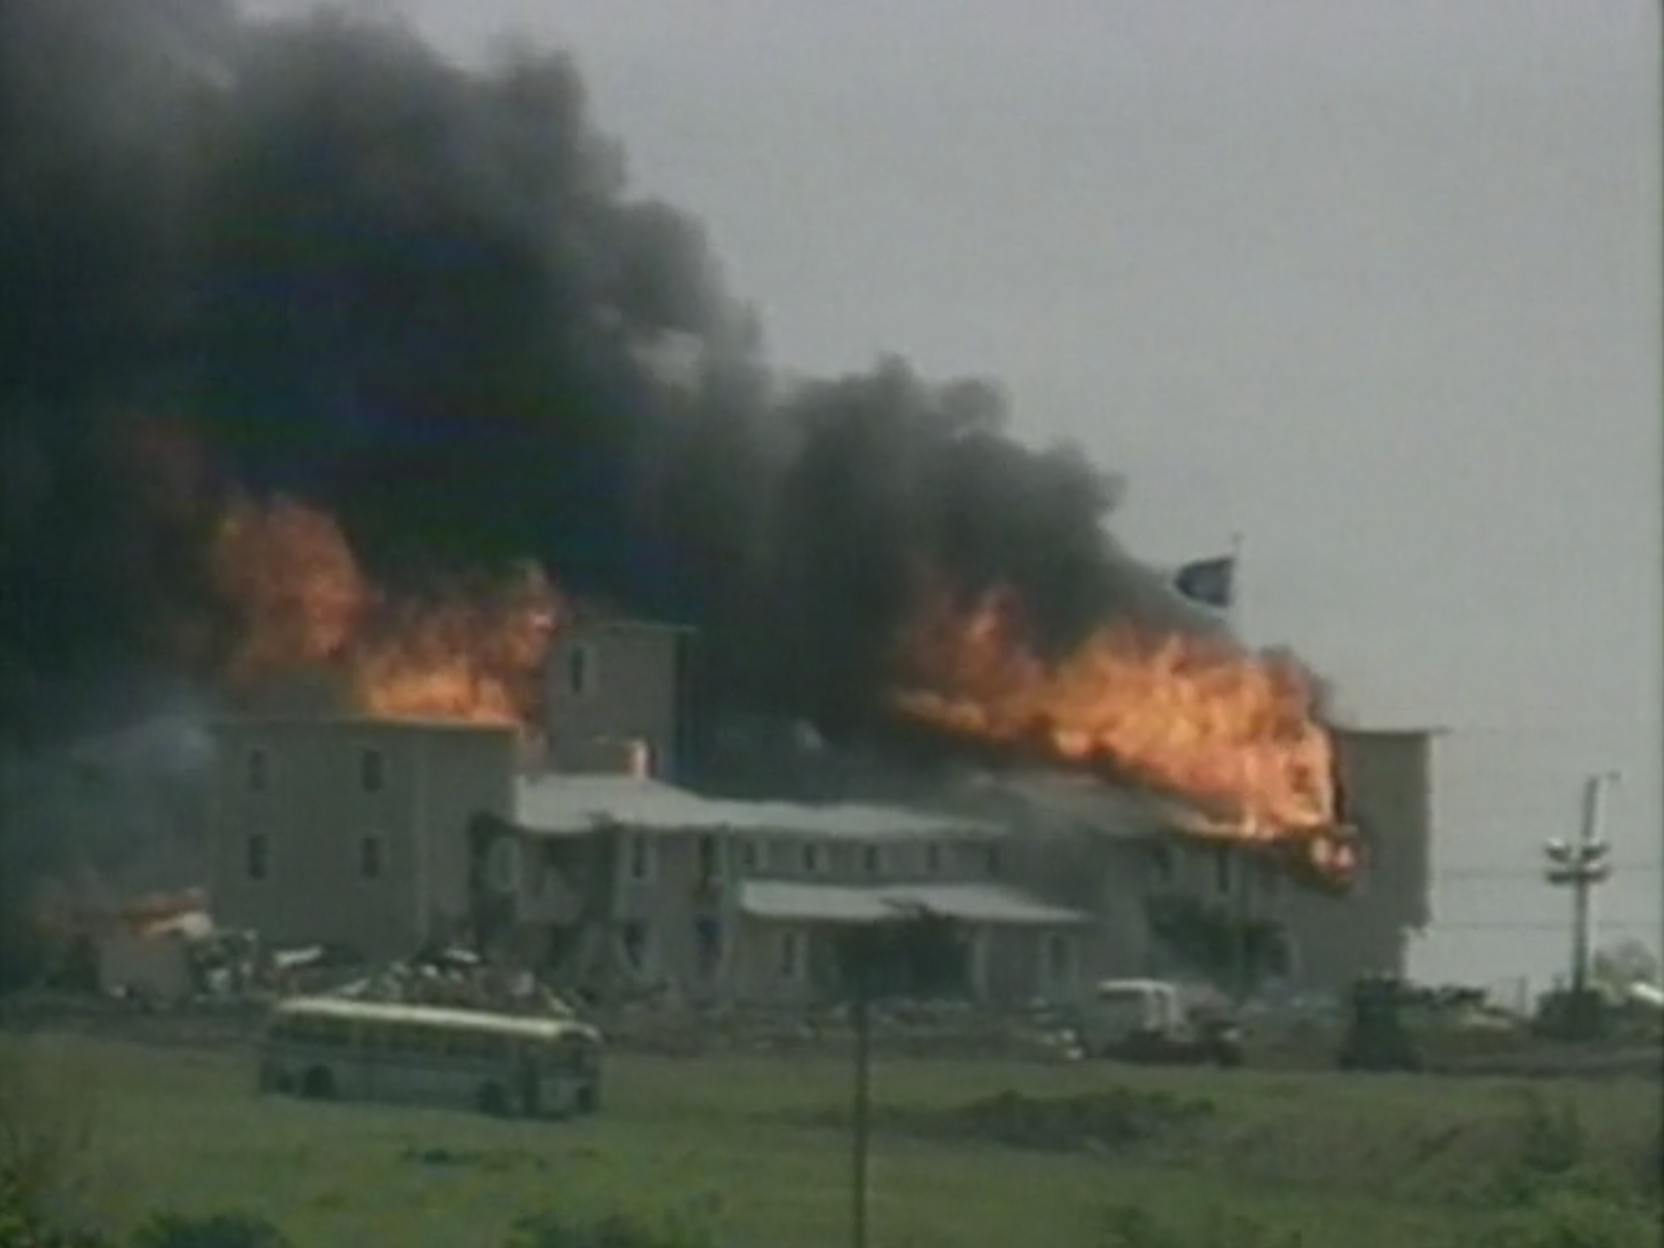 best documentaries on amazon: Waco Rules of Engagement